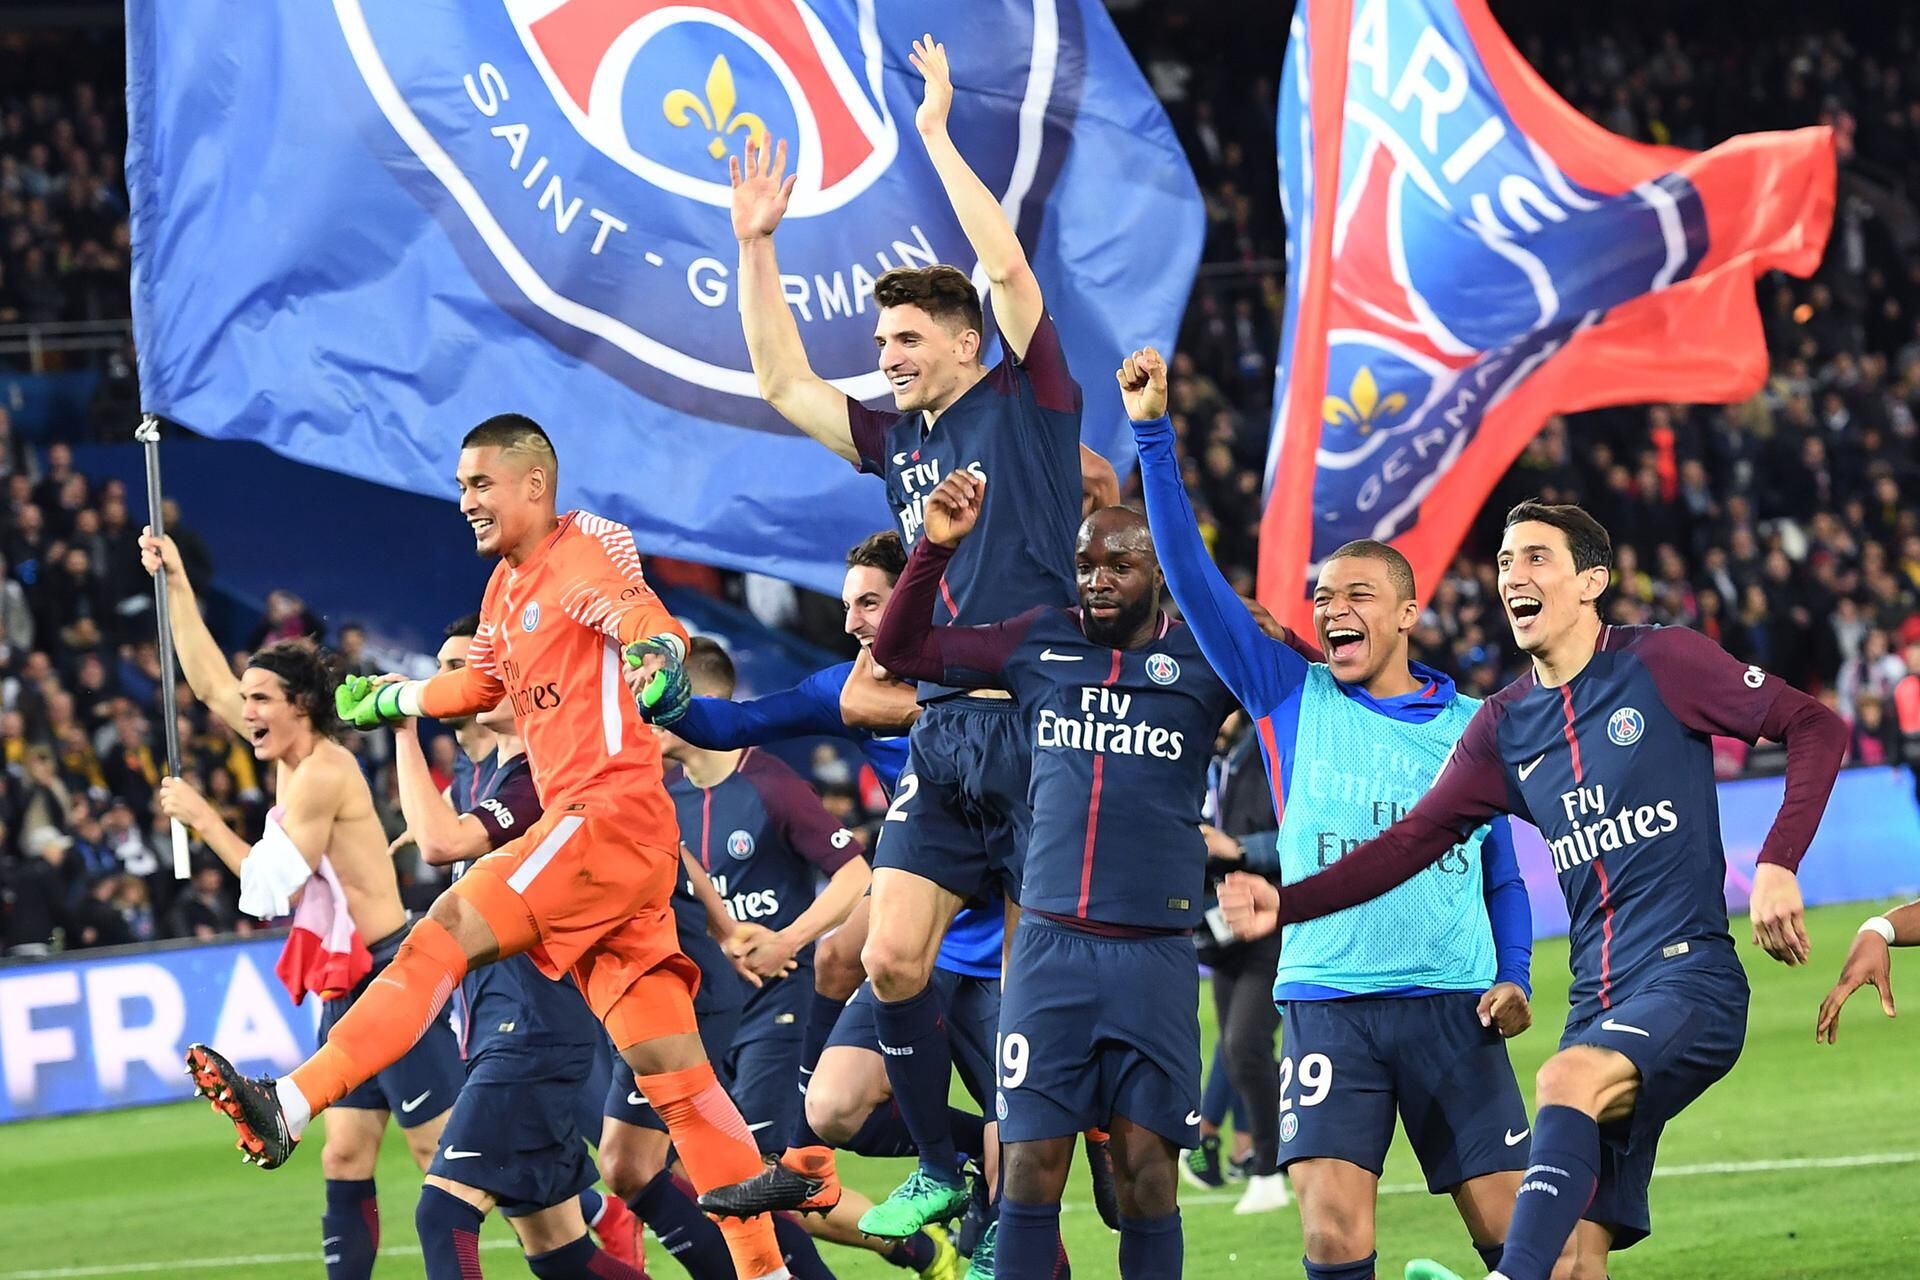 50 years of PSG: A look back at the rise of France's wealthiest club